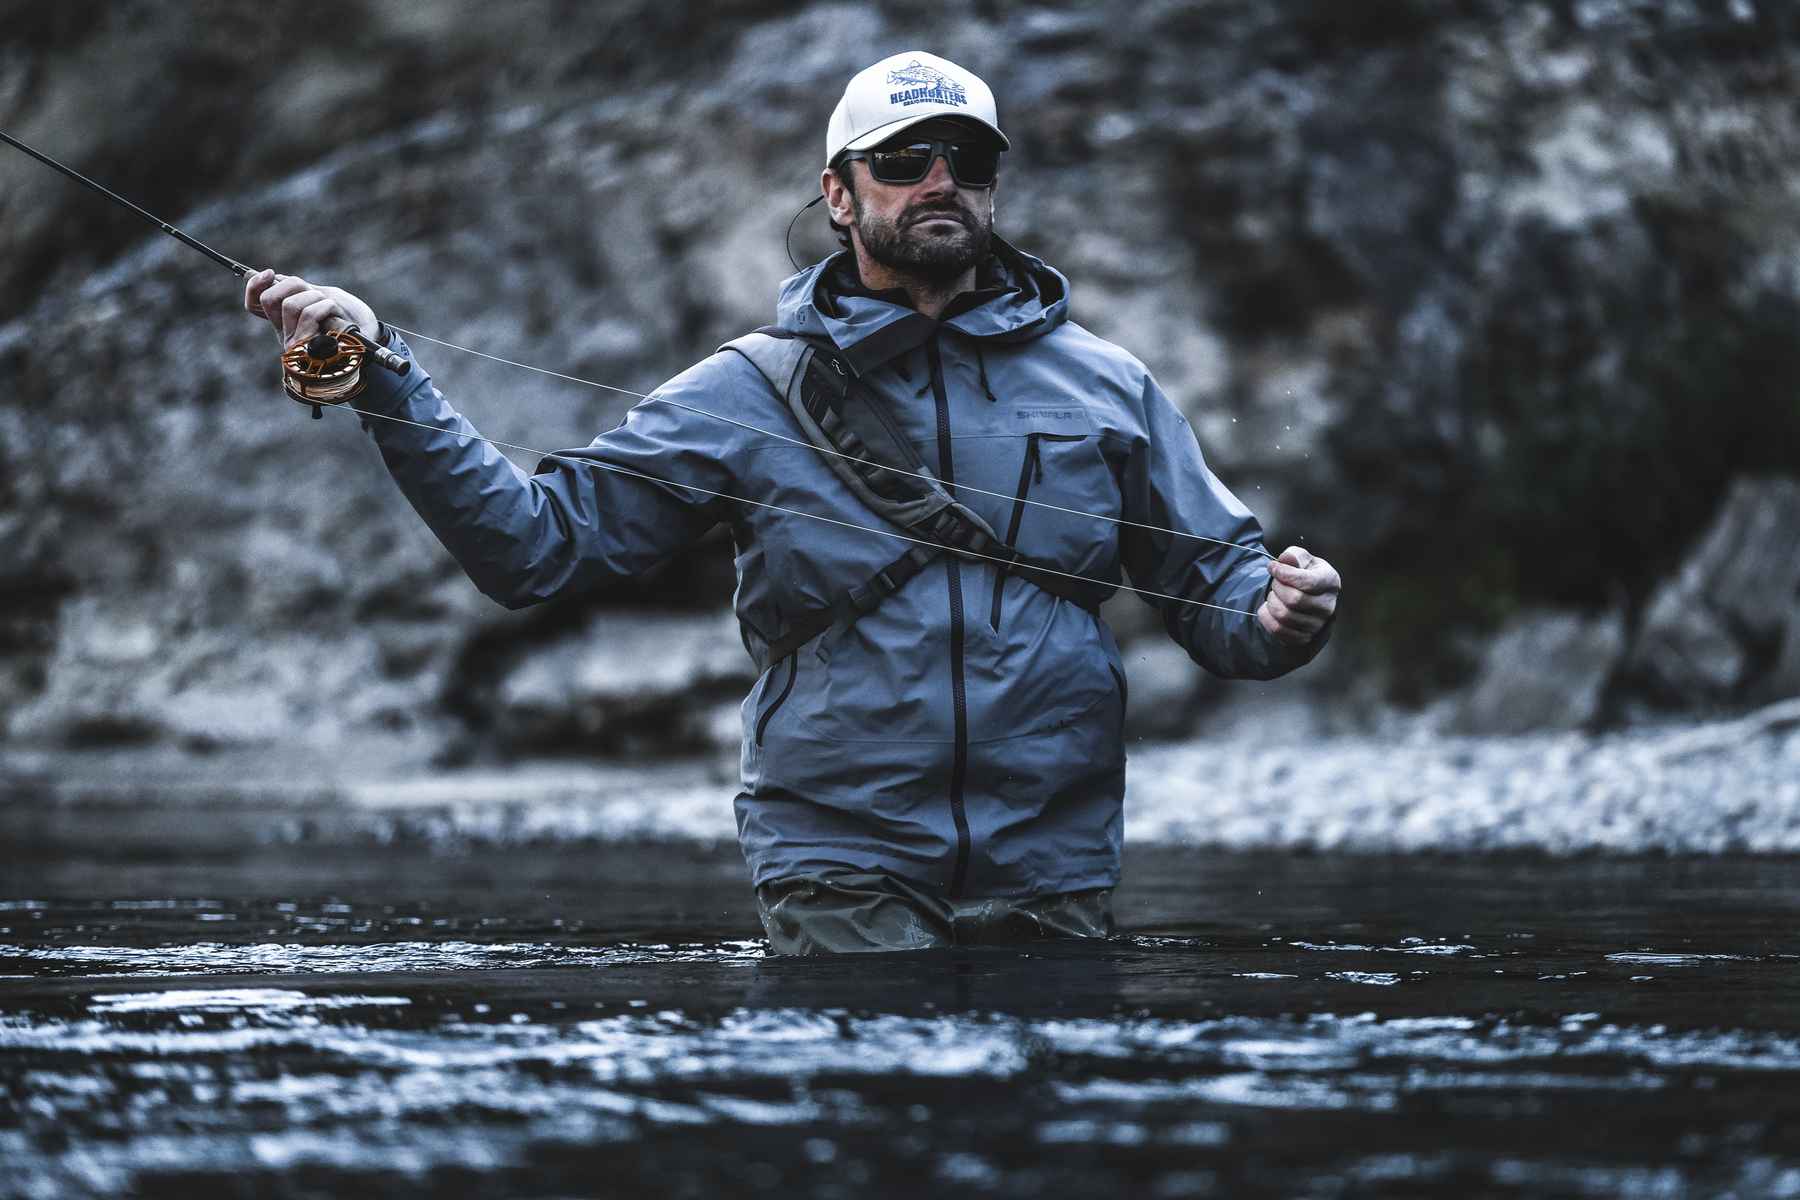 The Best New Fly Fishing Packs, Wading Boots, and Apparel